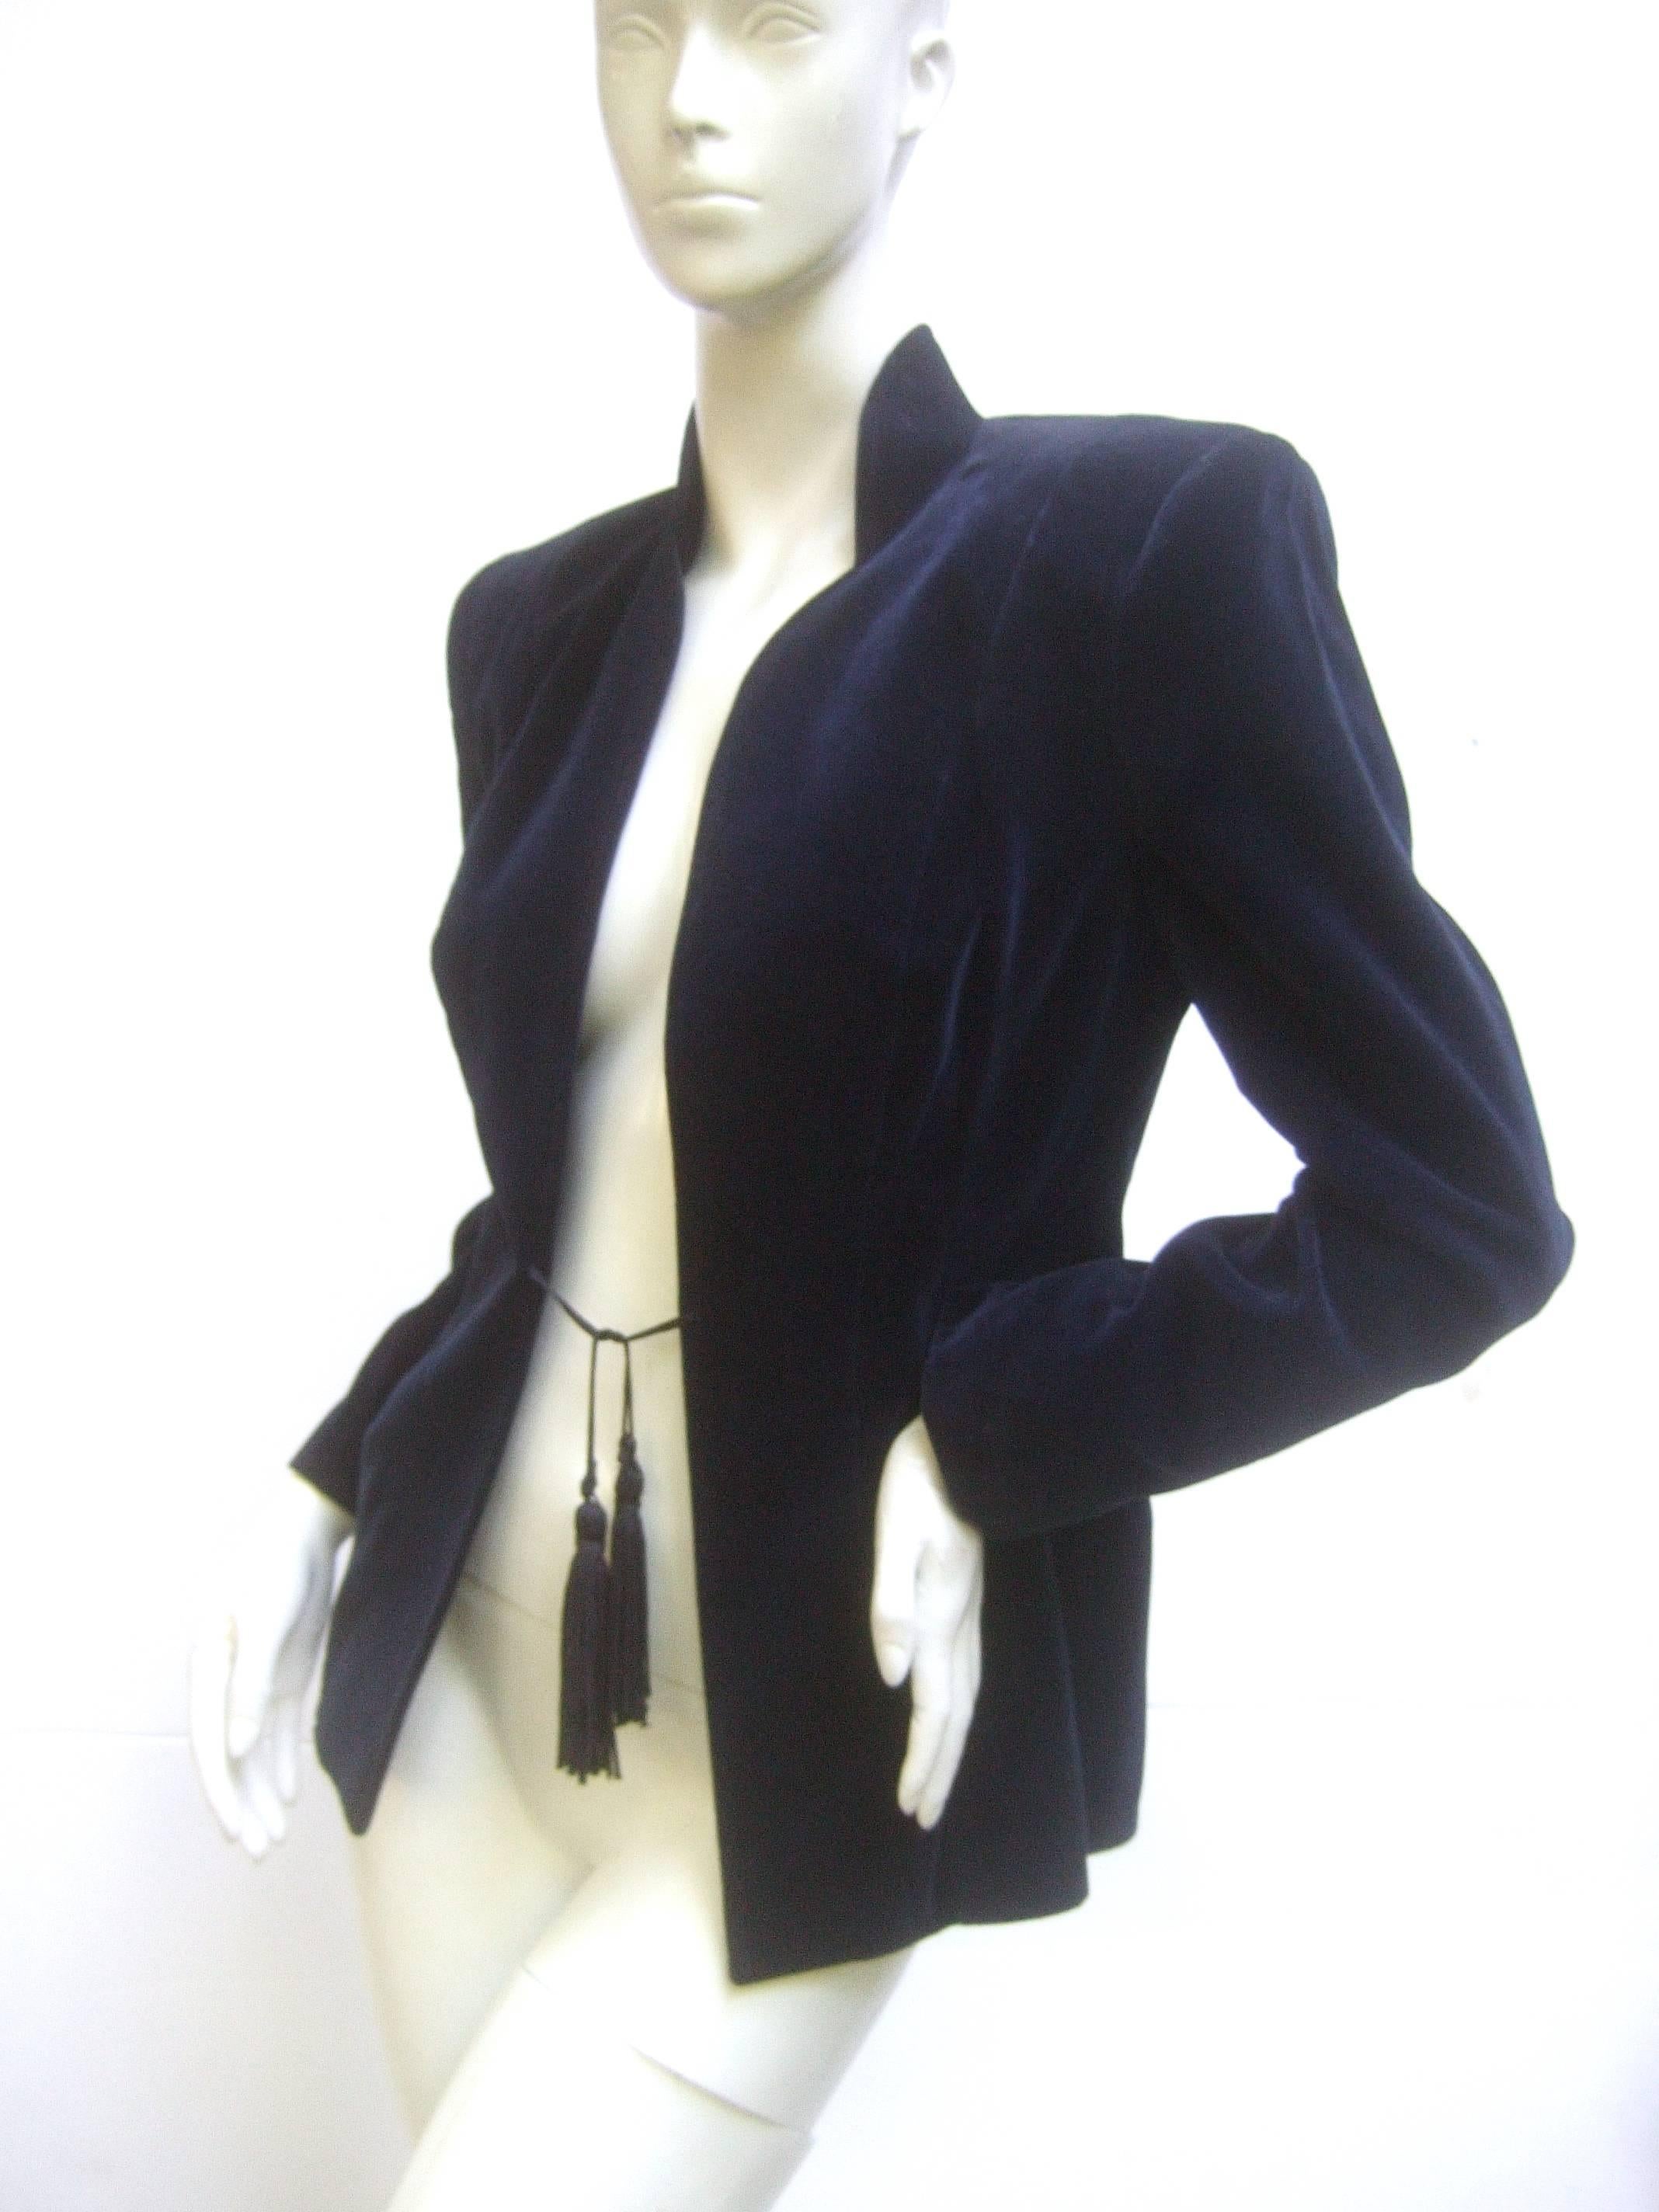 Gorgeous Ossie Clark rich midnight blue velvet jacket from the early 1970's. No doubt a nod to the YSL velvet jackets that were coming out of Paris at this time but with a softer Asian inspired feel conveyed by the black tassel closure and the